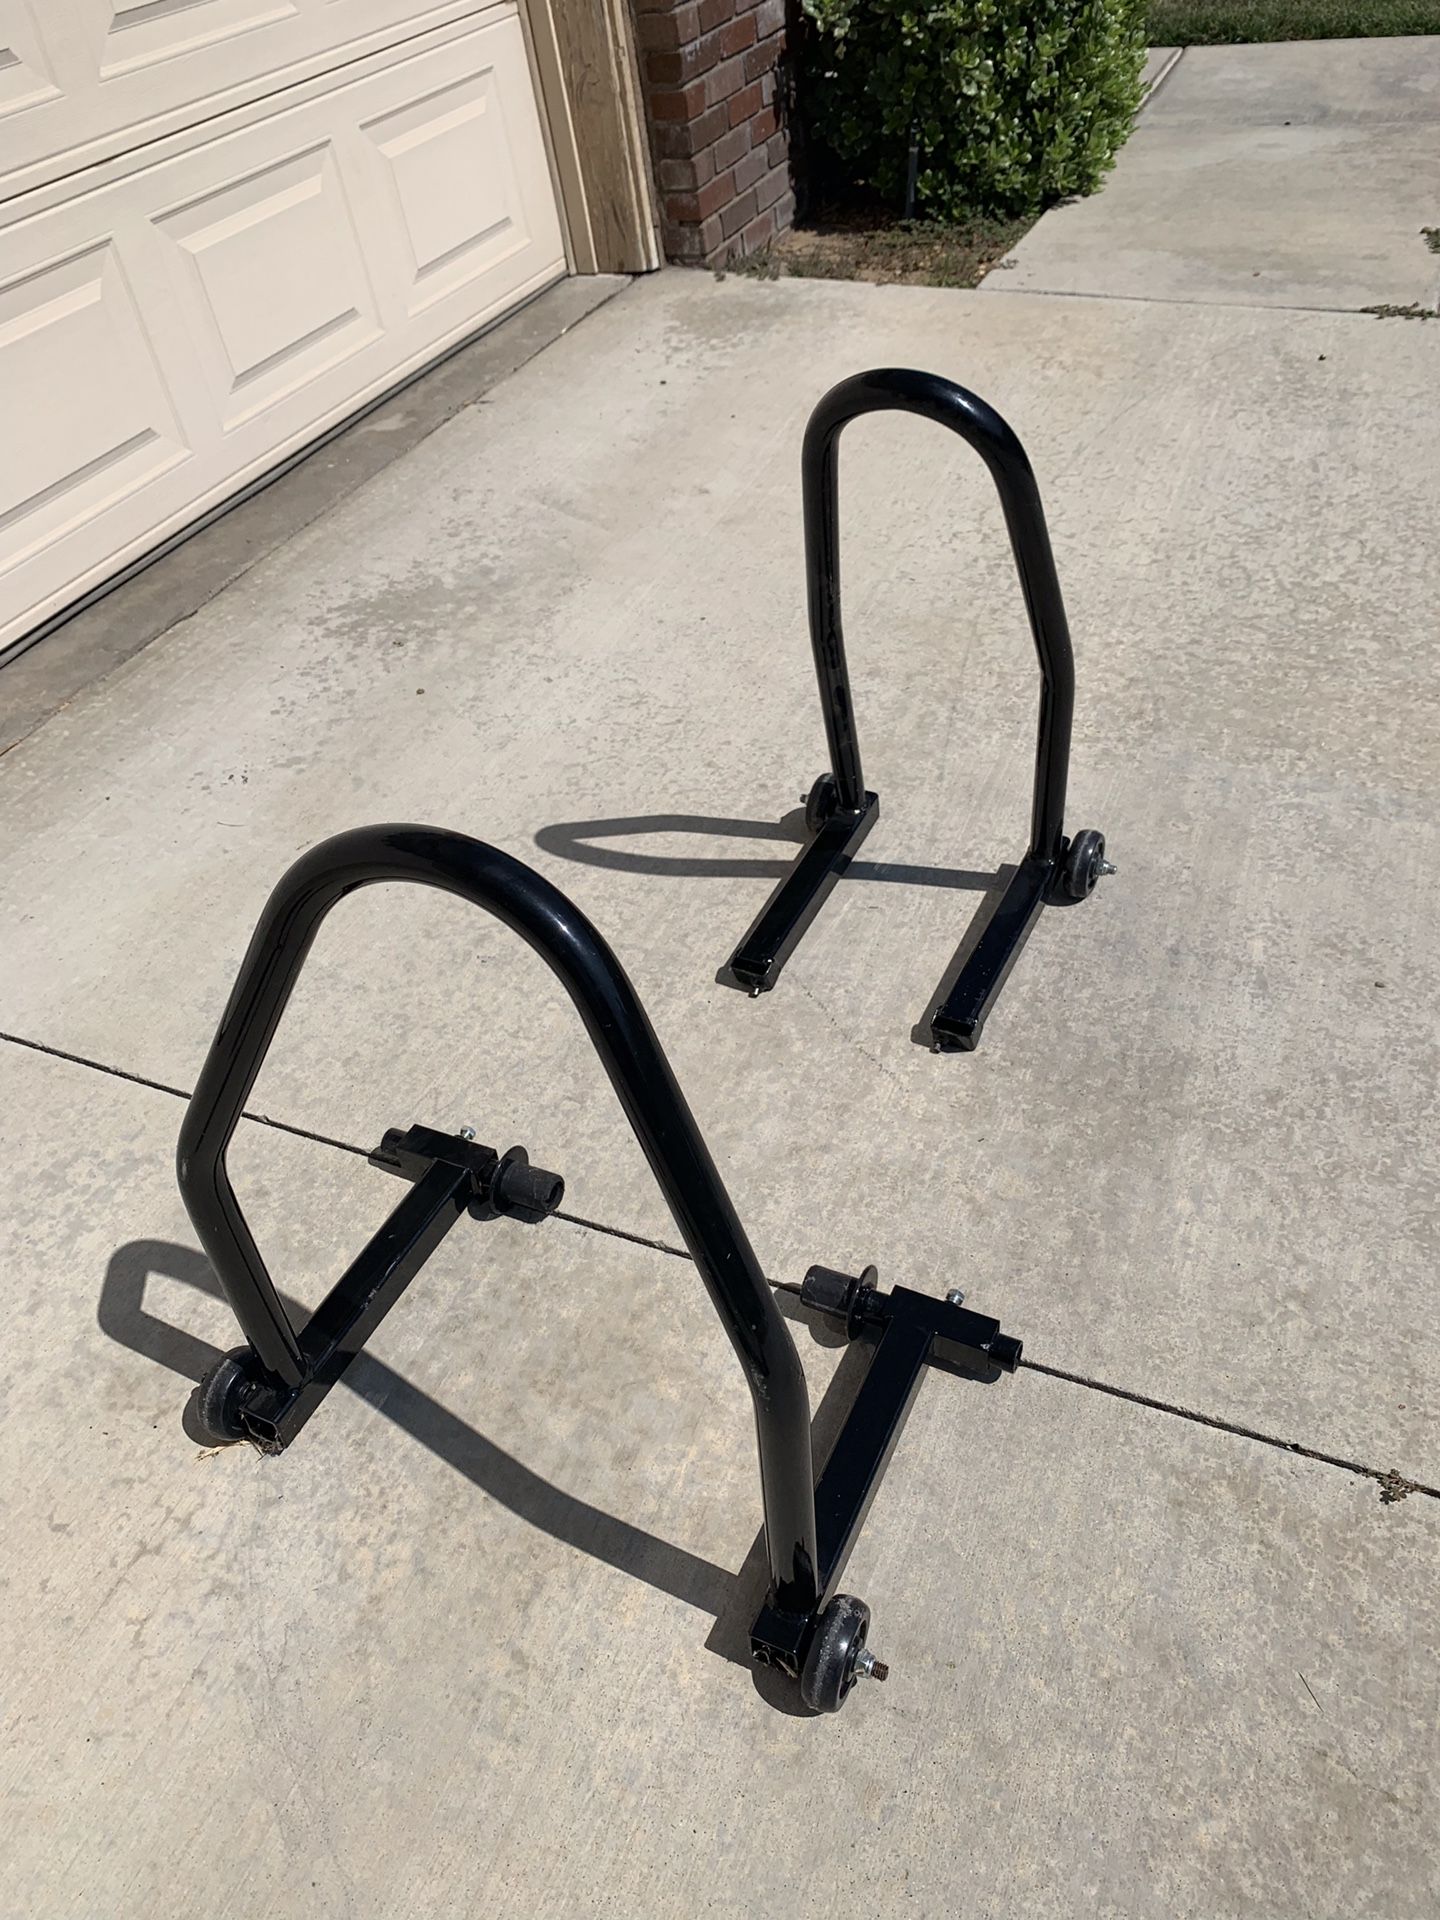 Motorcycle Stands (Front and Back)